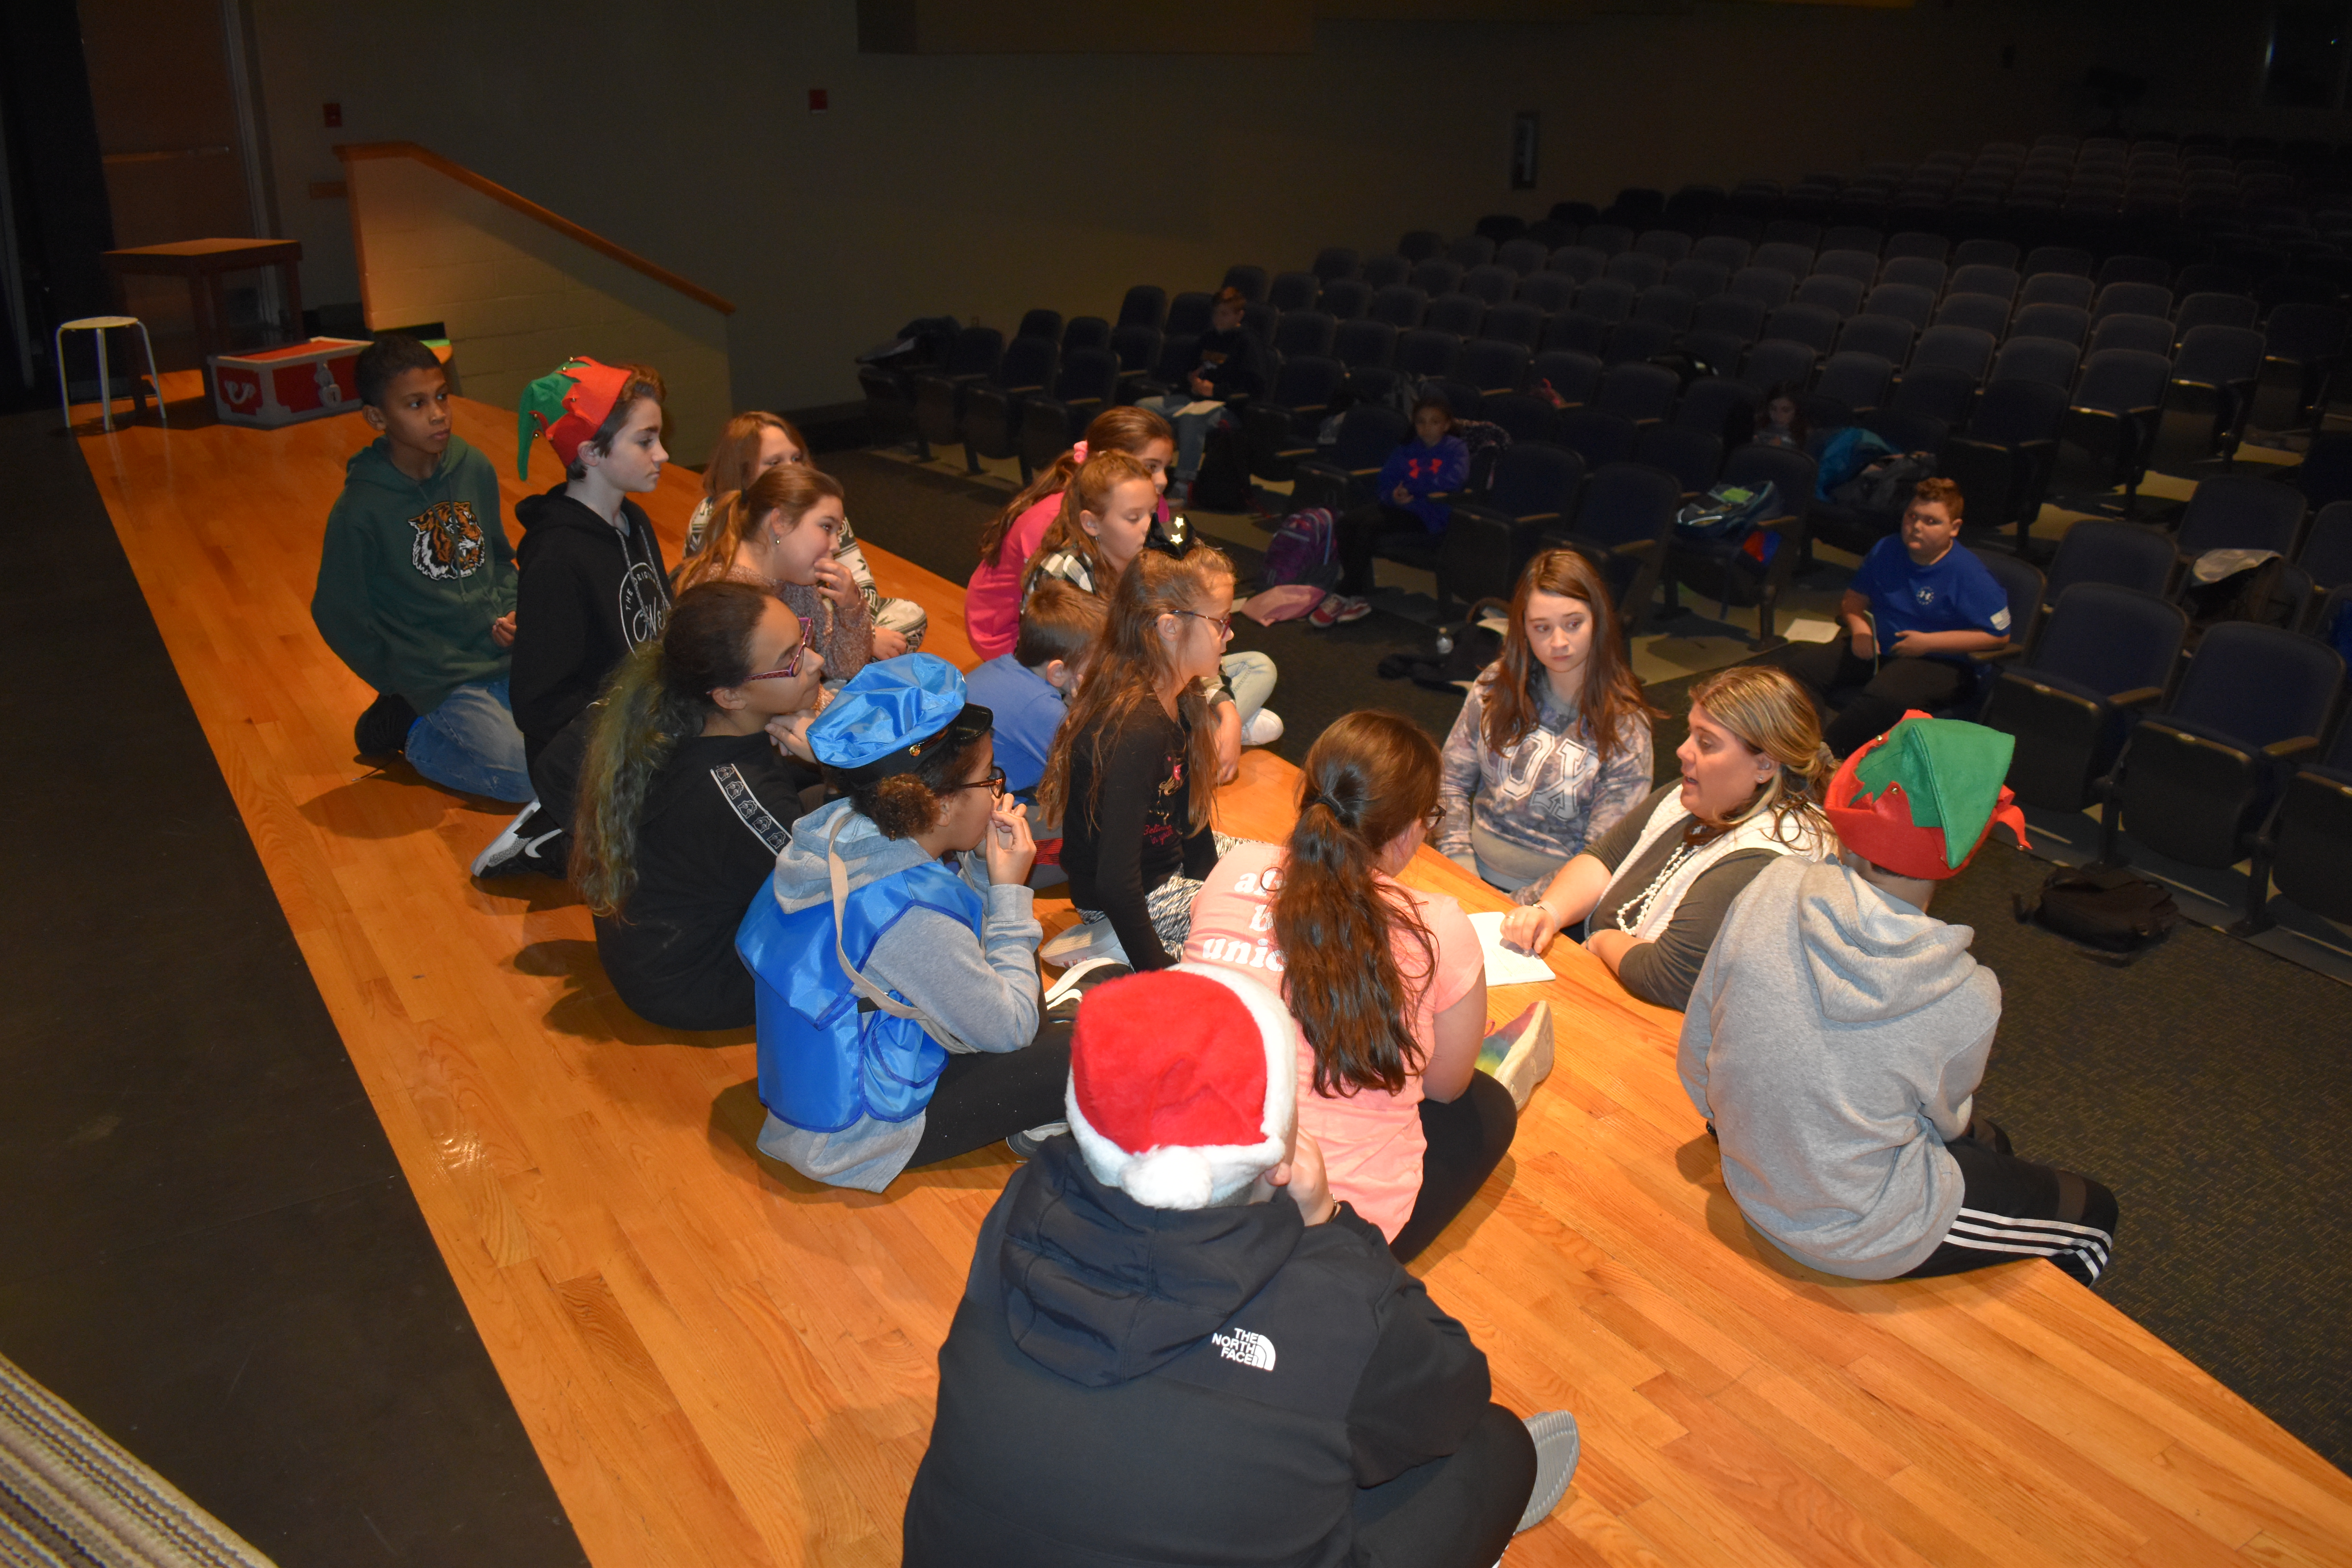 Brookfield Drama Club adviser Megan Rodgers goes over notes after a run through of “How Santa Got His Christmas Tree.”